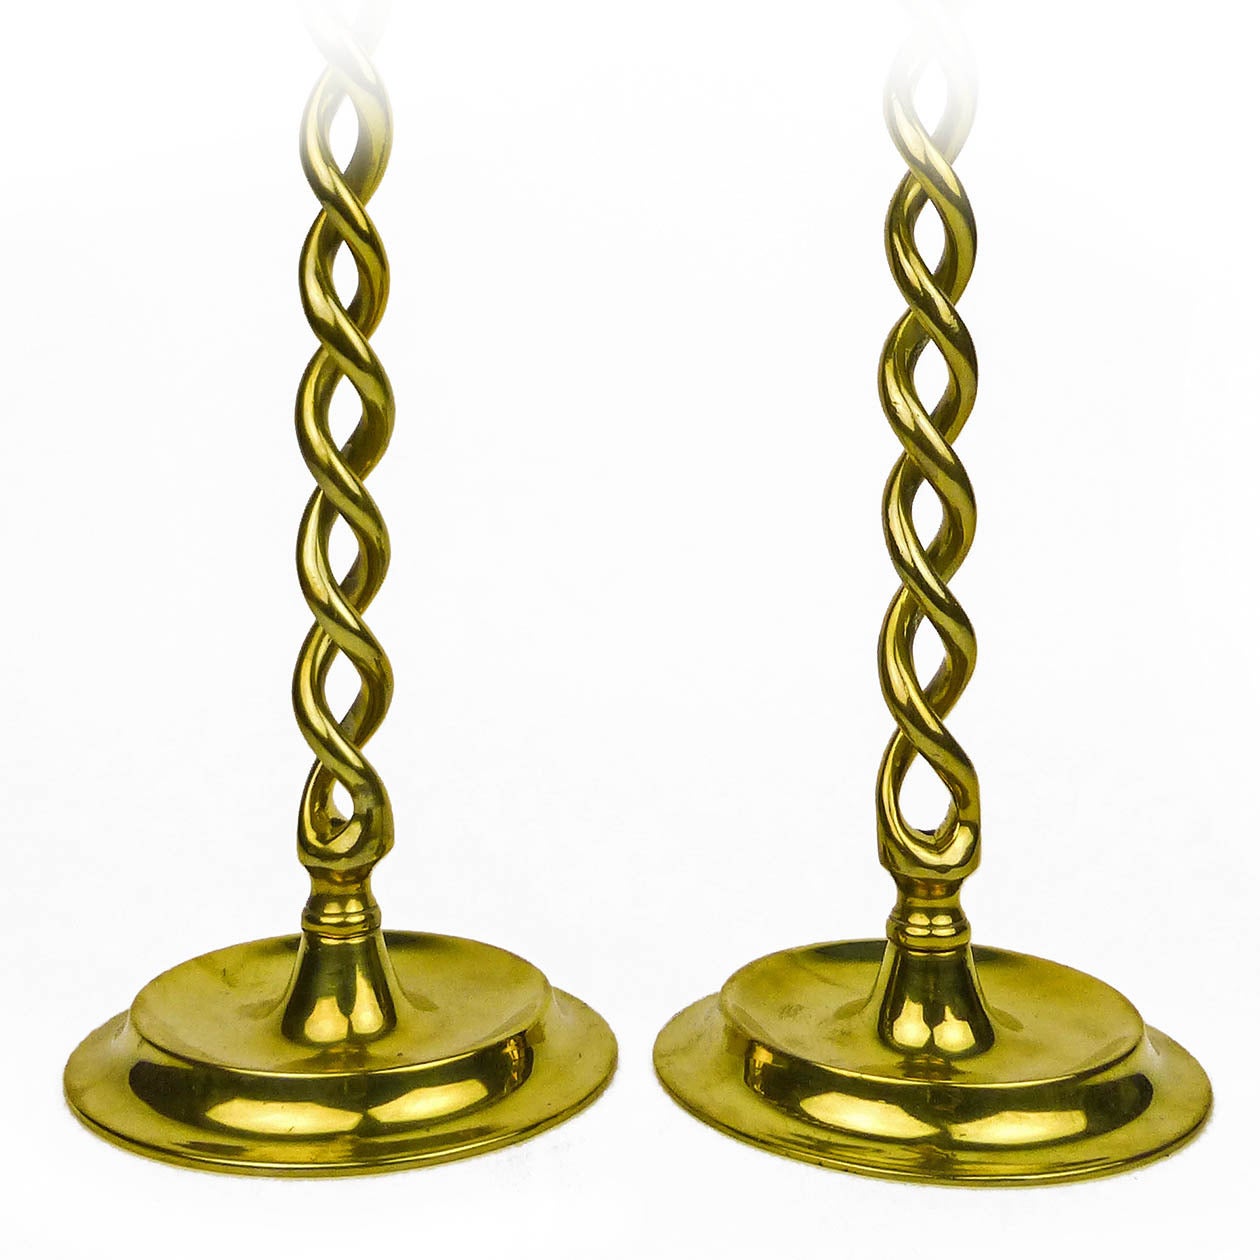 Tall pair of English Victorian brass double twist candlesticks, circa 1875.

Measures: Height 20 3/4″, Base diameter 6 1/2″.